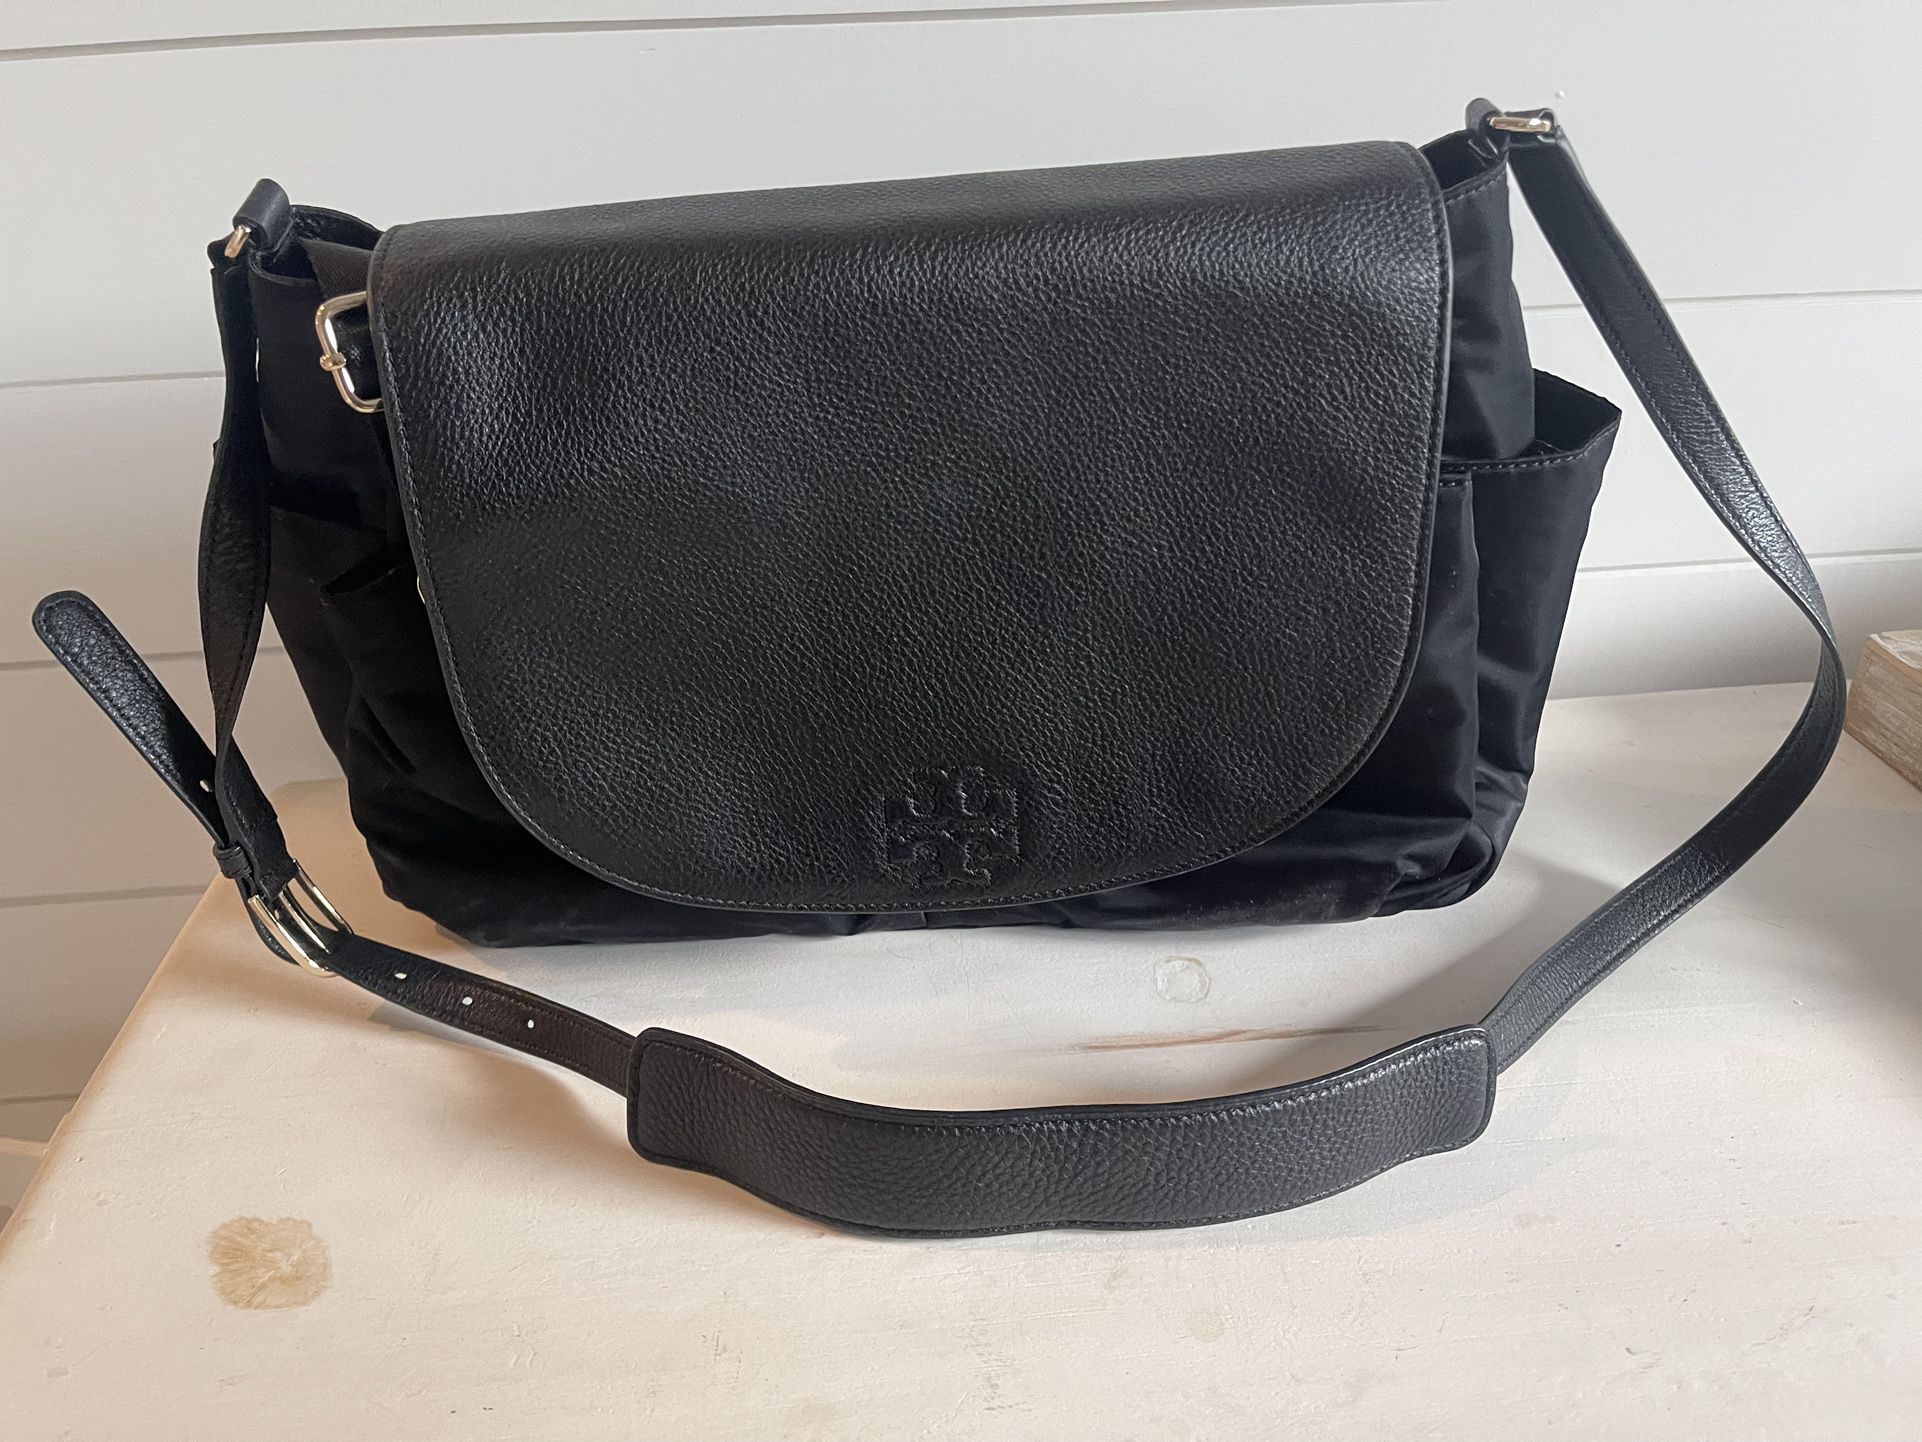 Tory burch diaper bag for Sale in Port St. Lucie, FL - OfferUp